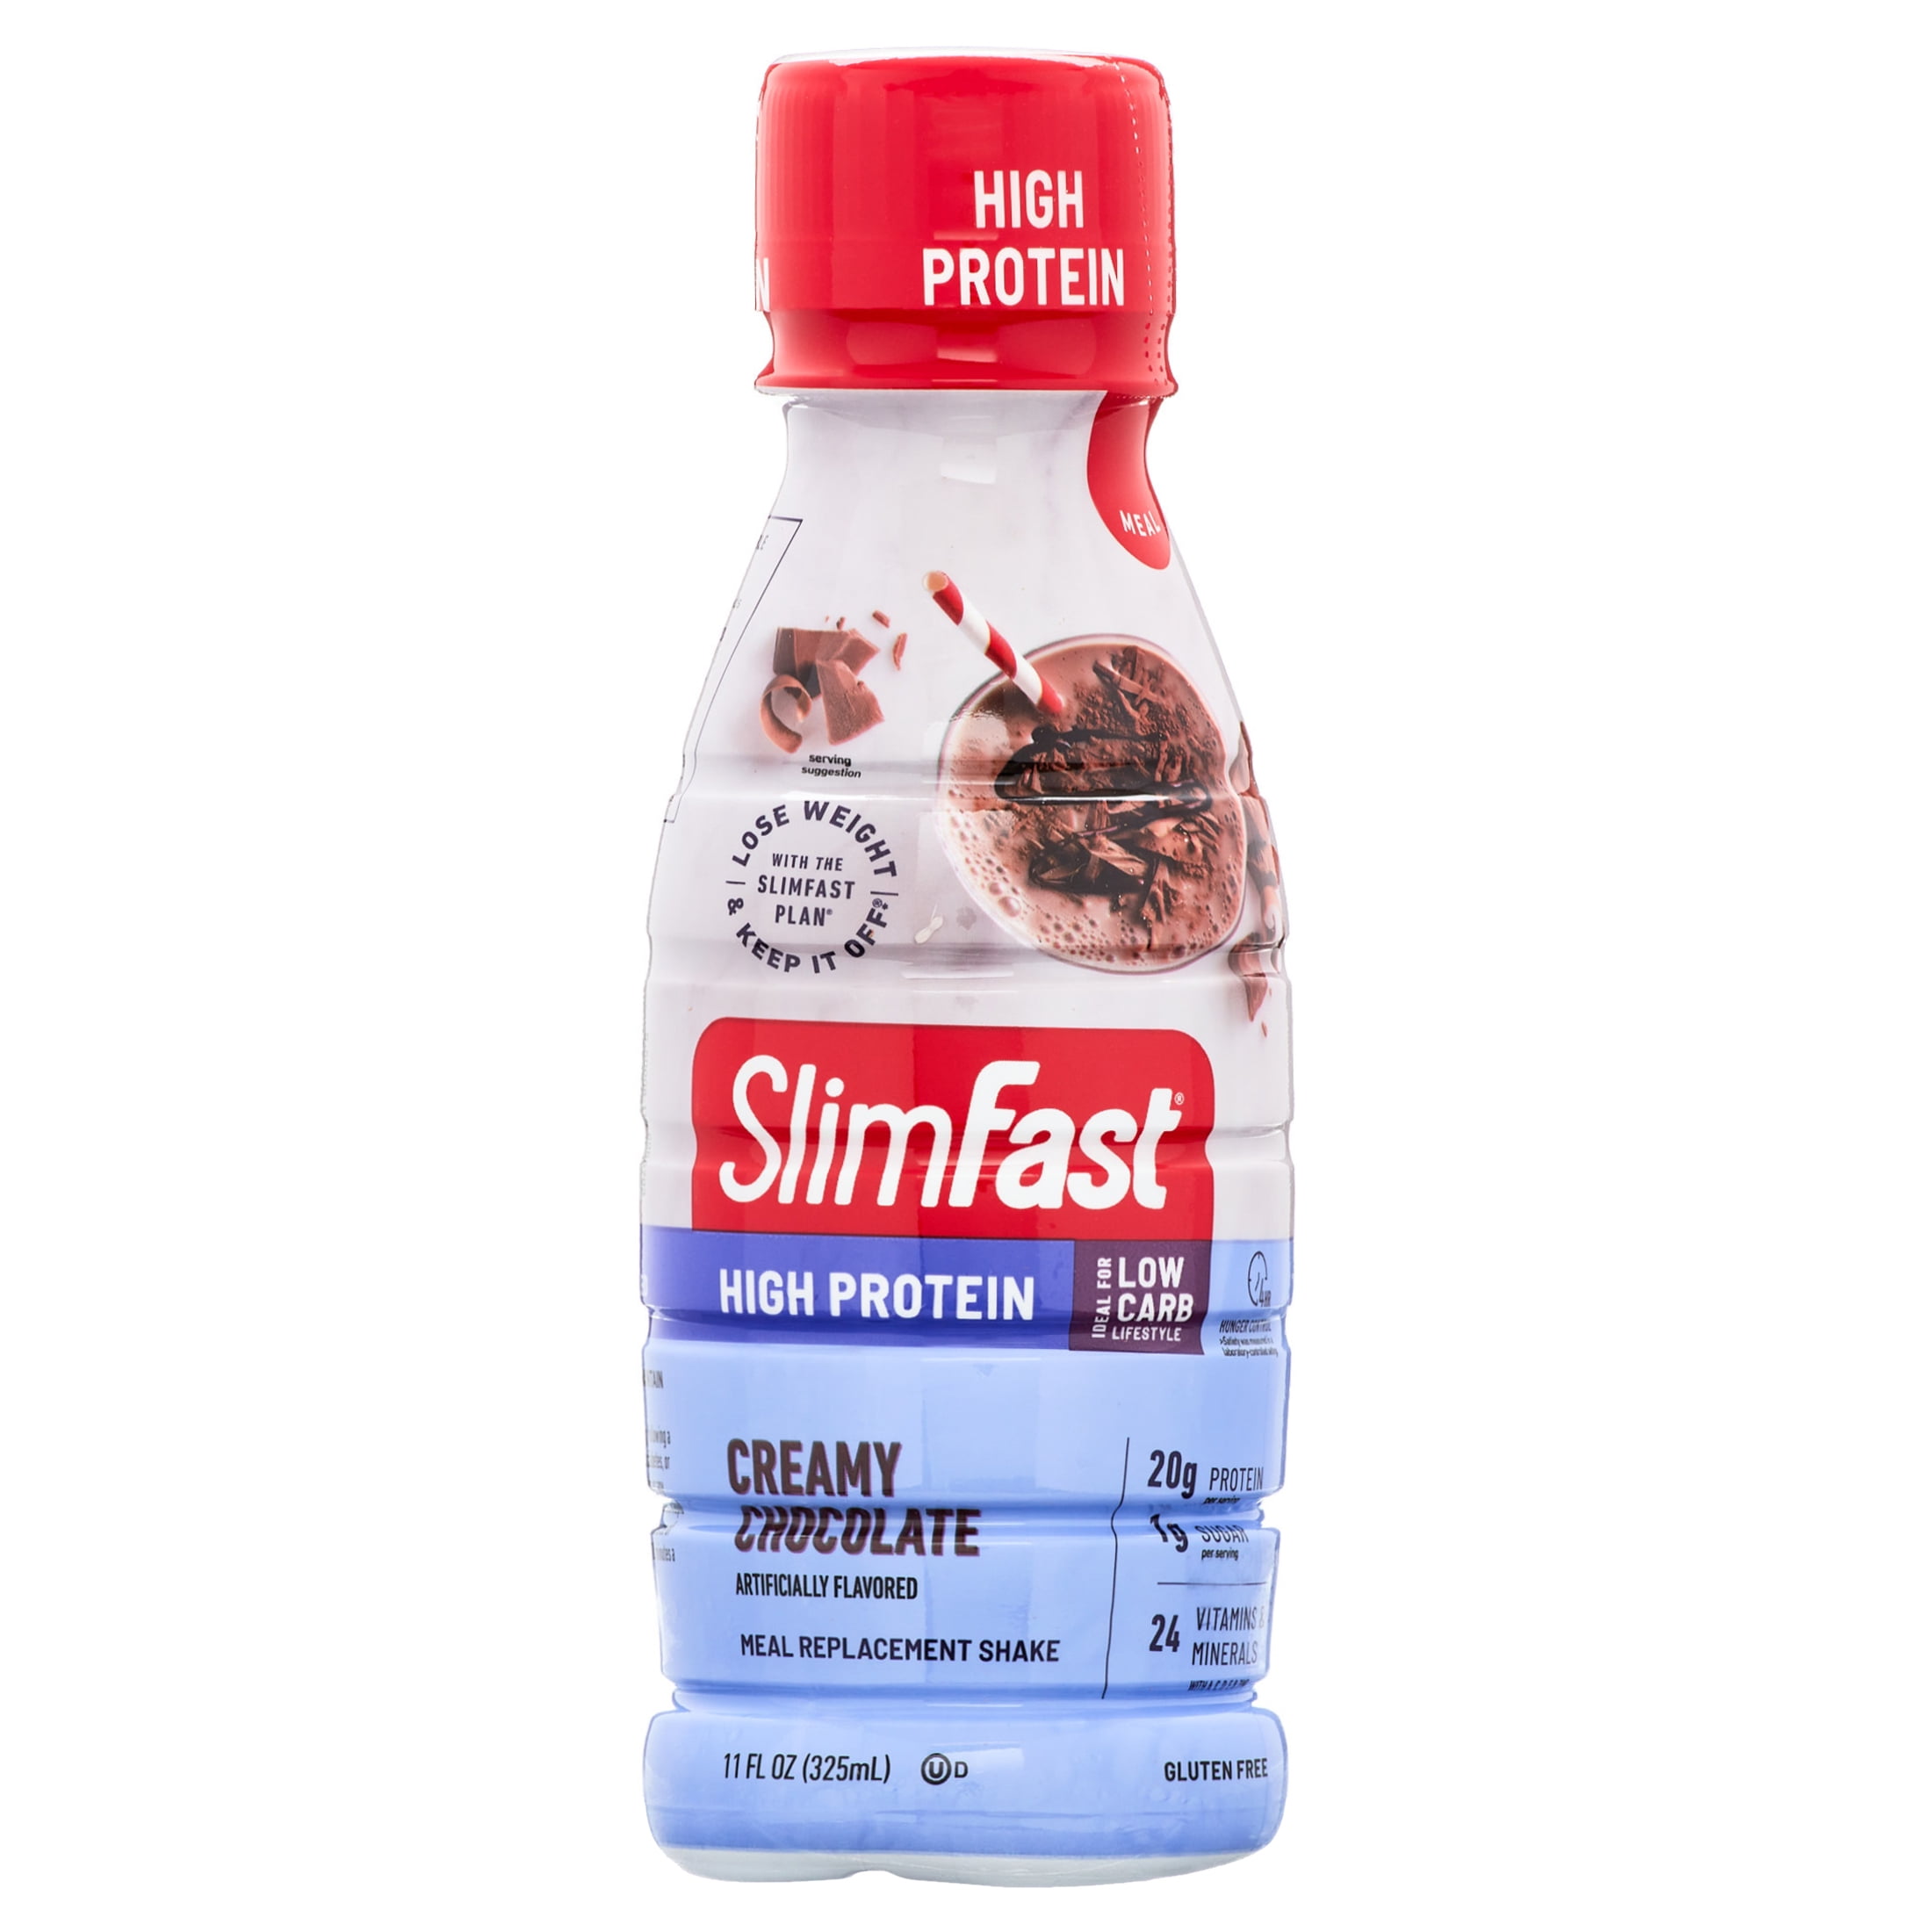 Slimfast Advanced Nutrition Creamy Chocolate High Protein Smoothie - 11.01 oz canister